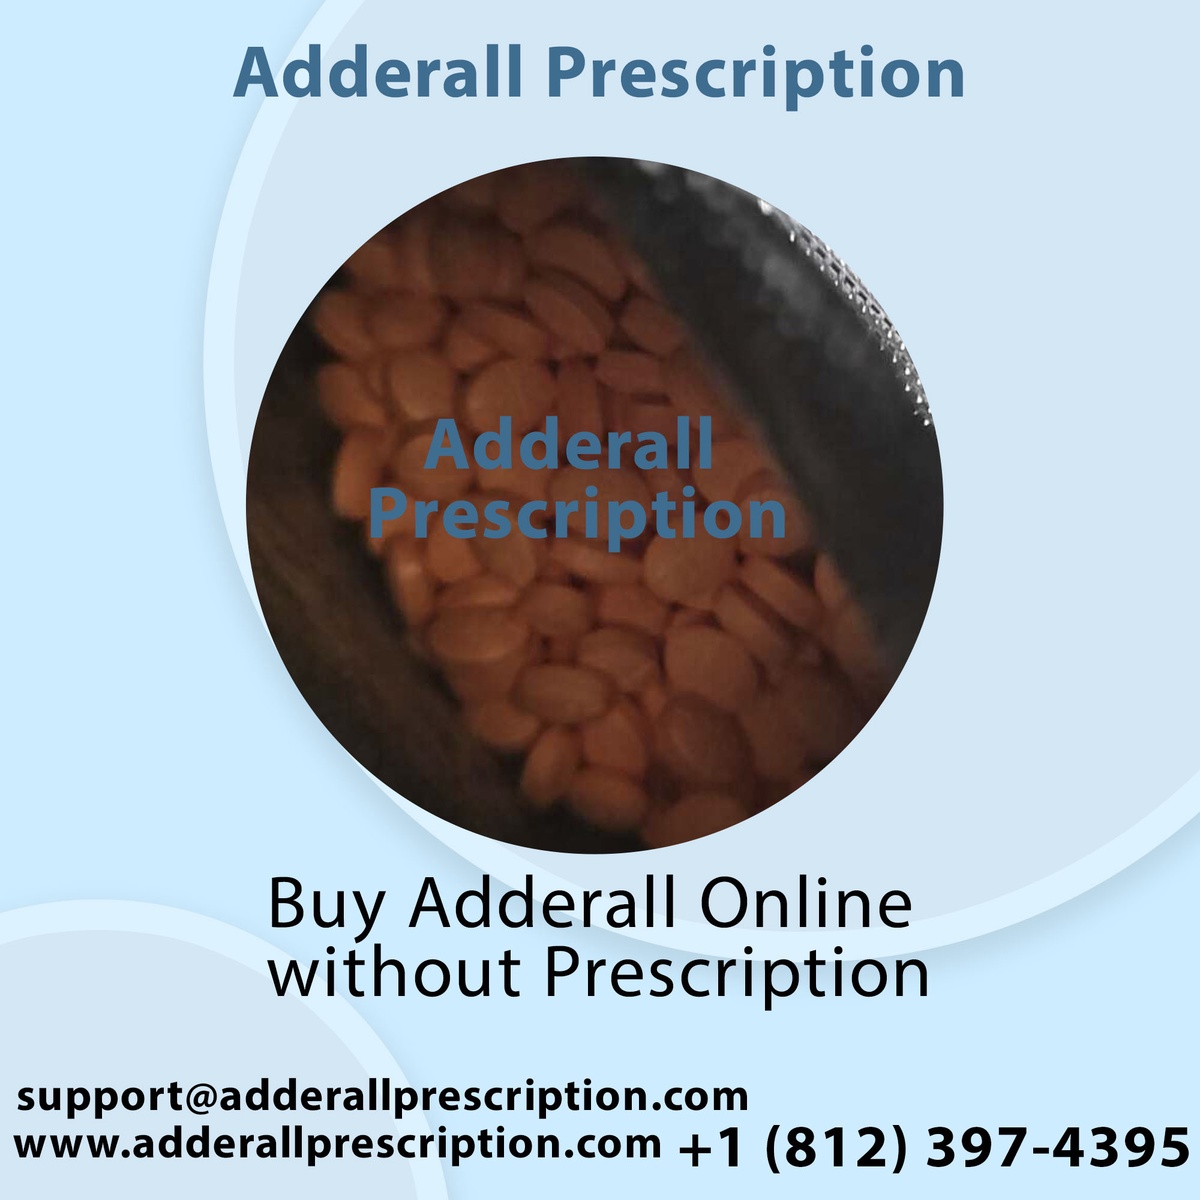 Buy Adderall Online without Prescription: Navigating the Risks and Responsibilities